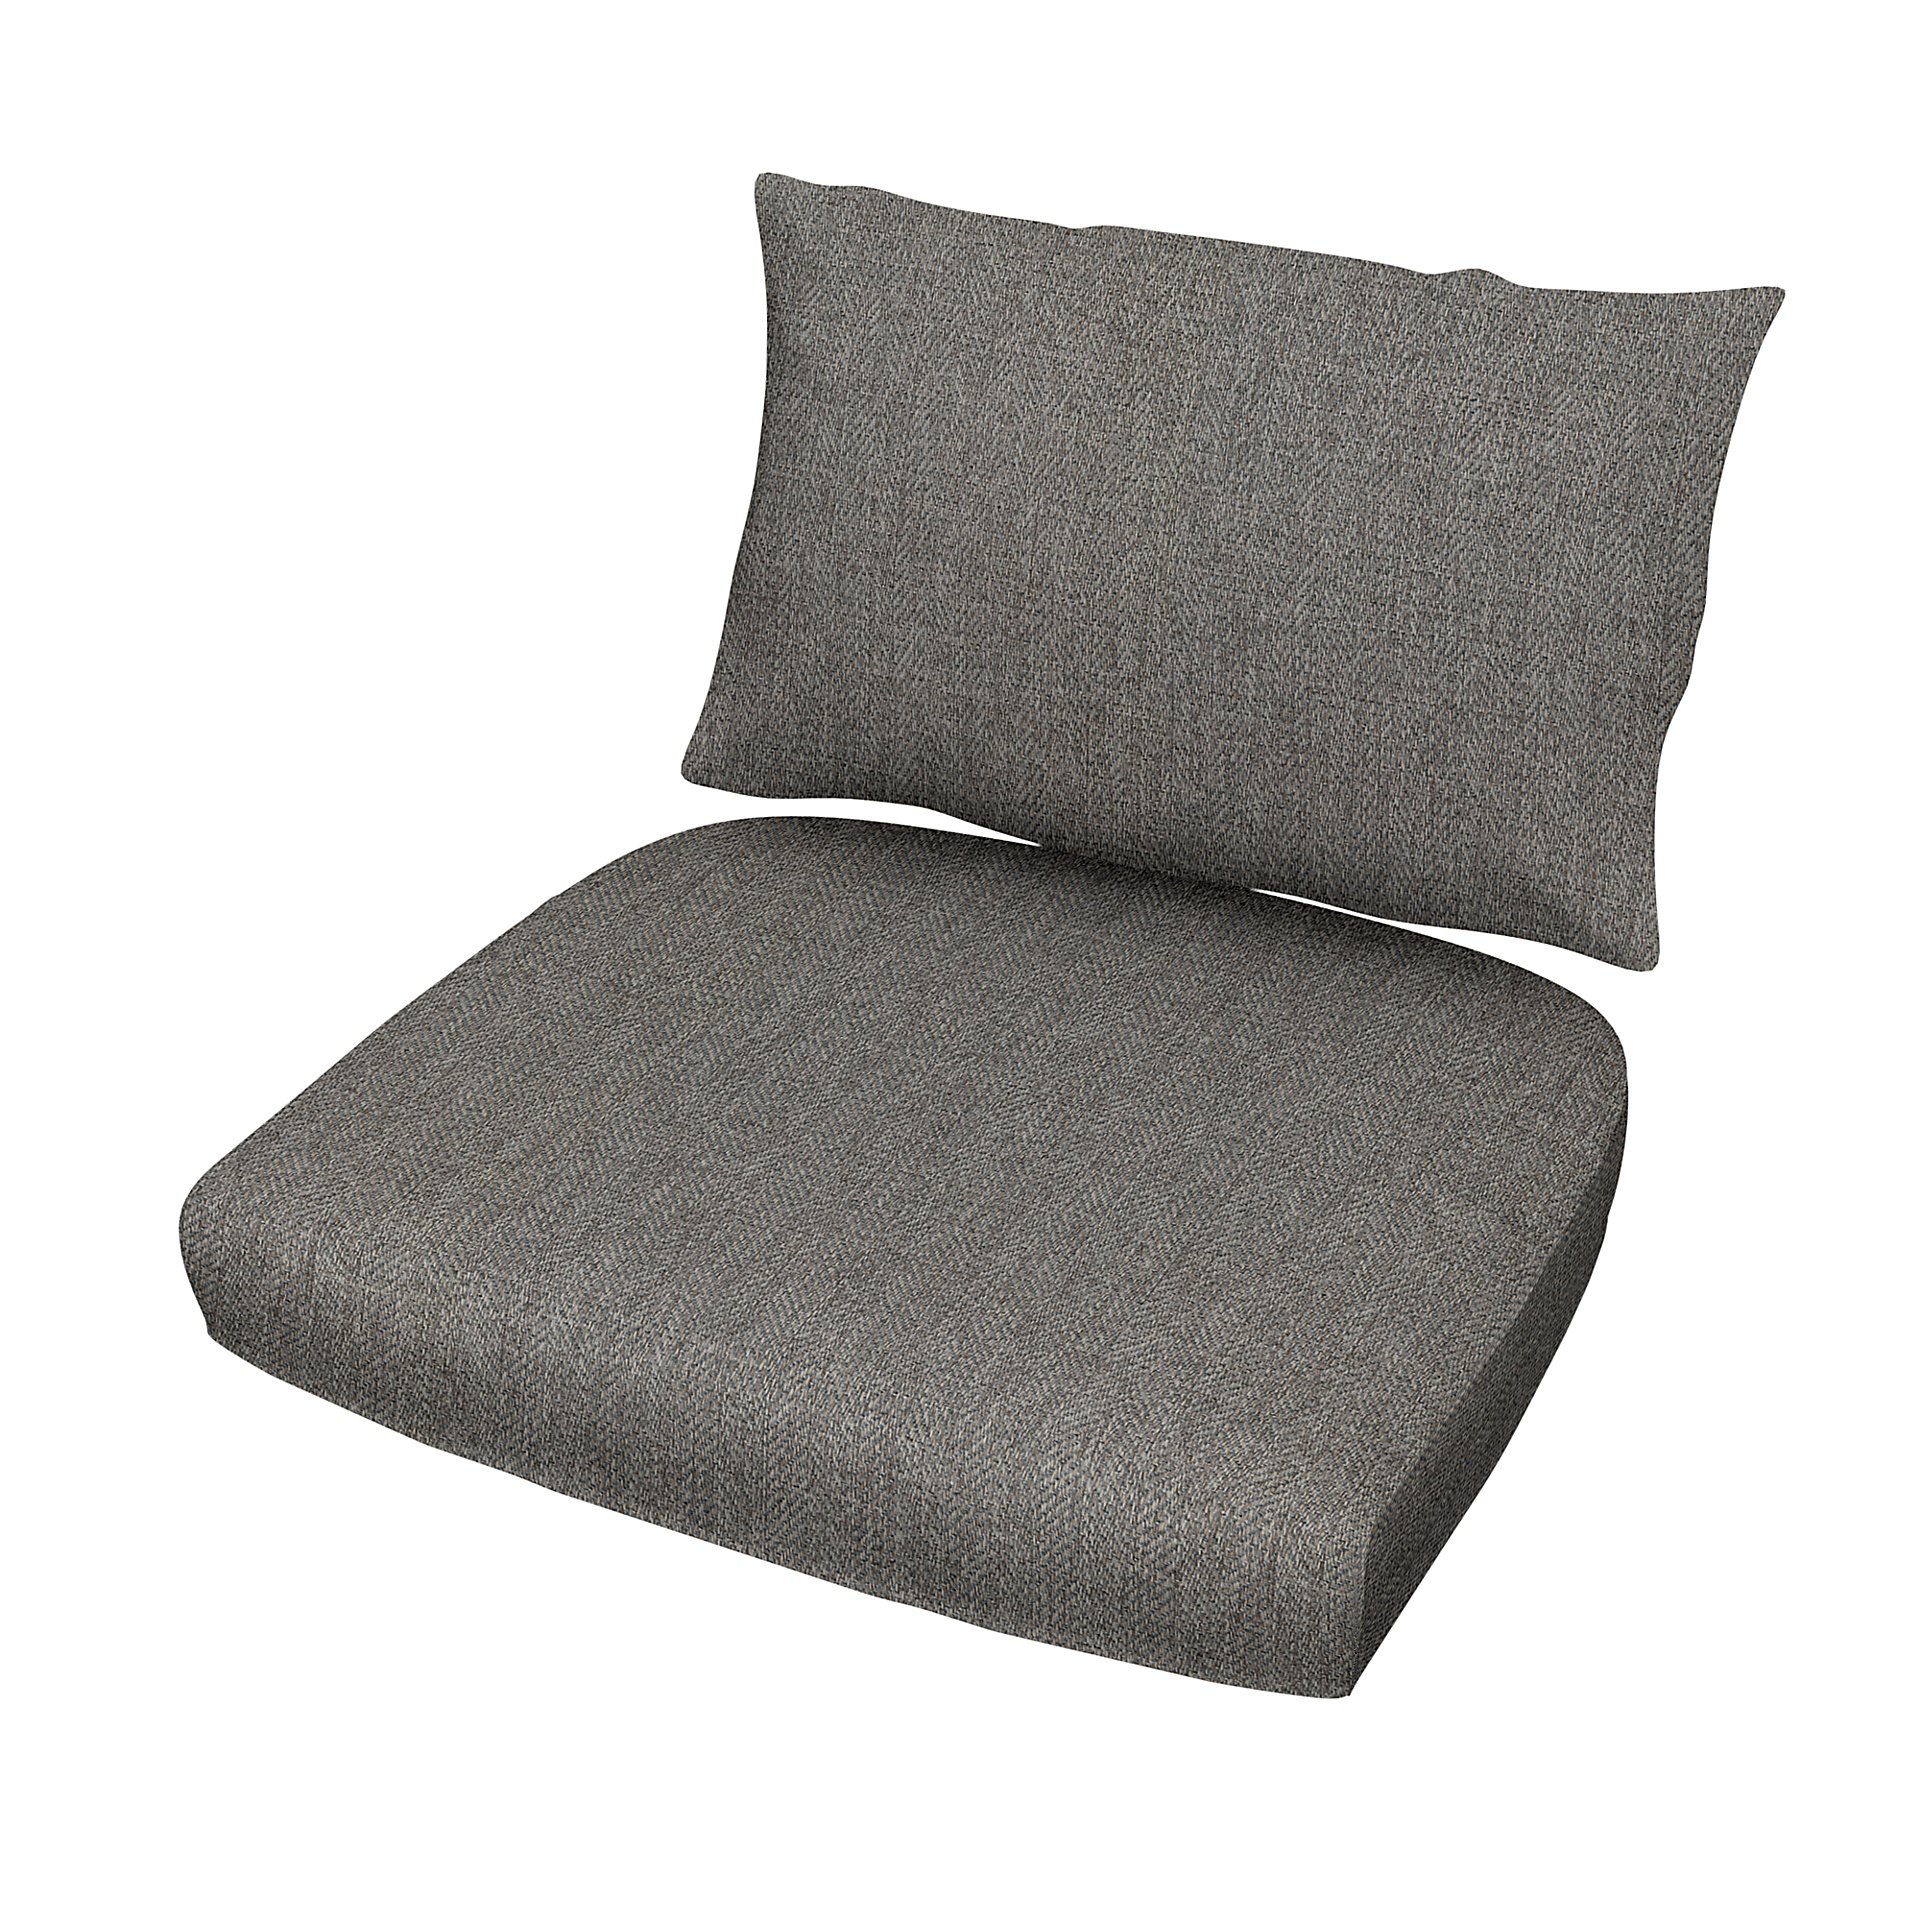 IKEA - Stockholm Rattan Chair Cushion Cover Set, Taupe, Boucle & Texture - Bemz